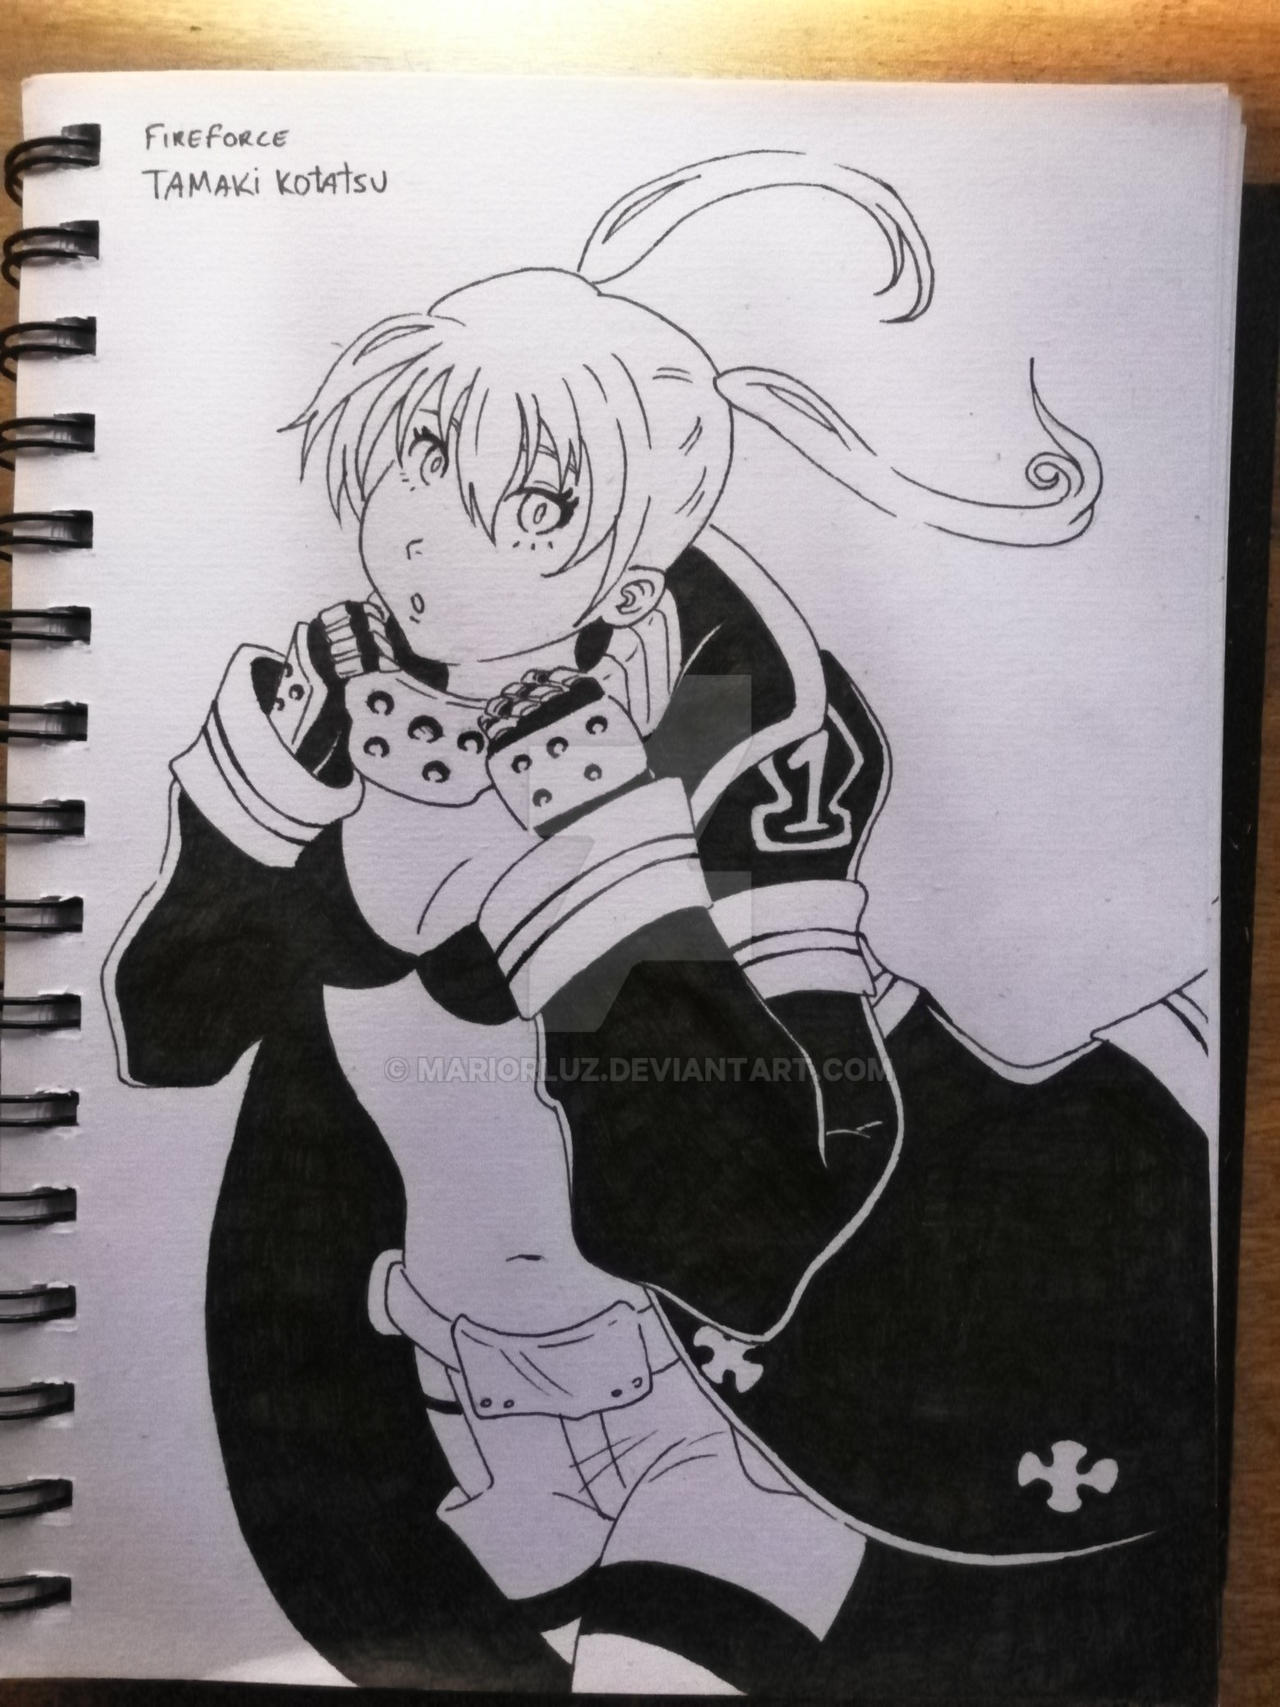 Mashima drew a picture of Tamaki to congratulate Fire Force on getting an  anime. : r/manga